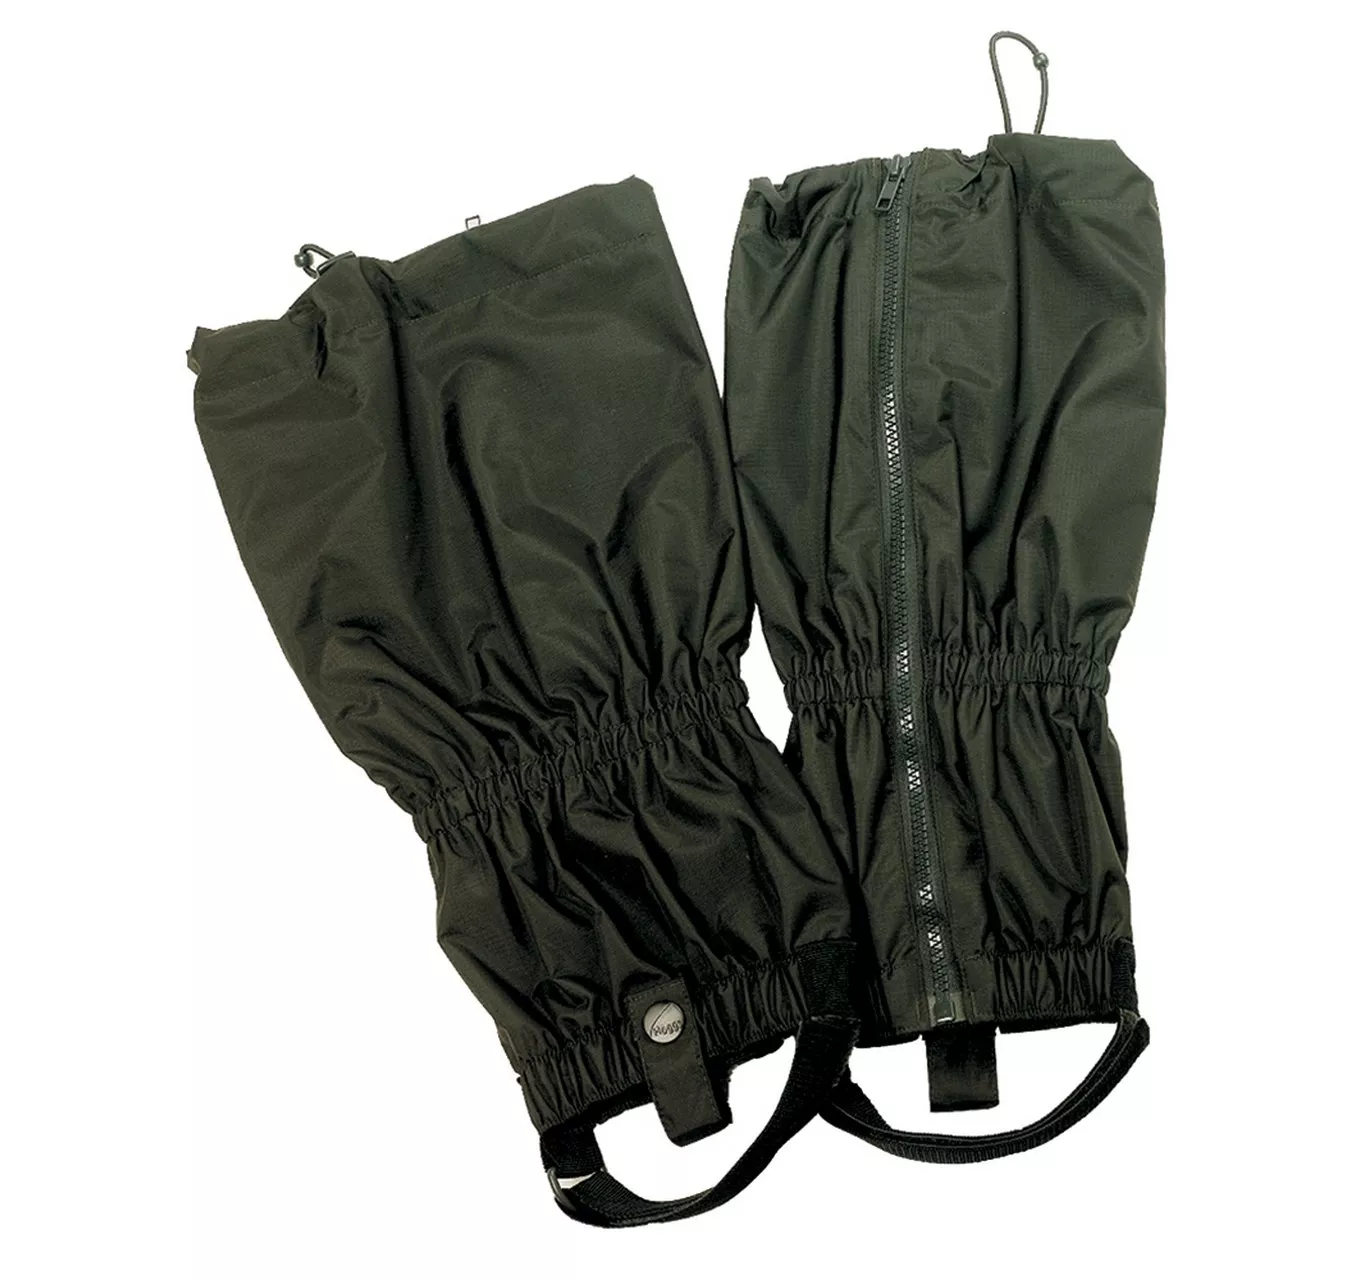 Green King Gaiters - One Size